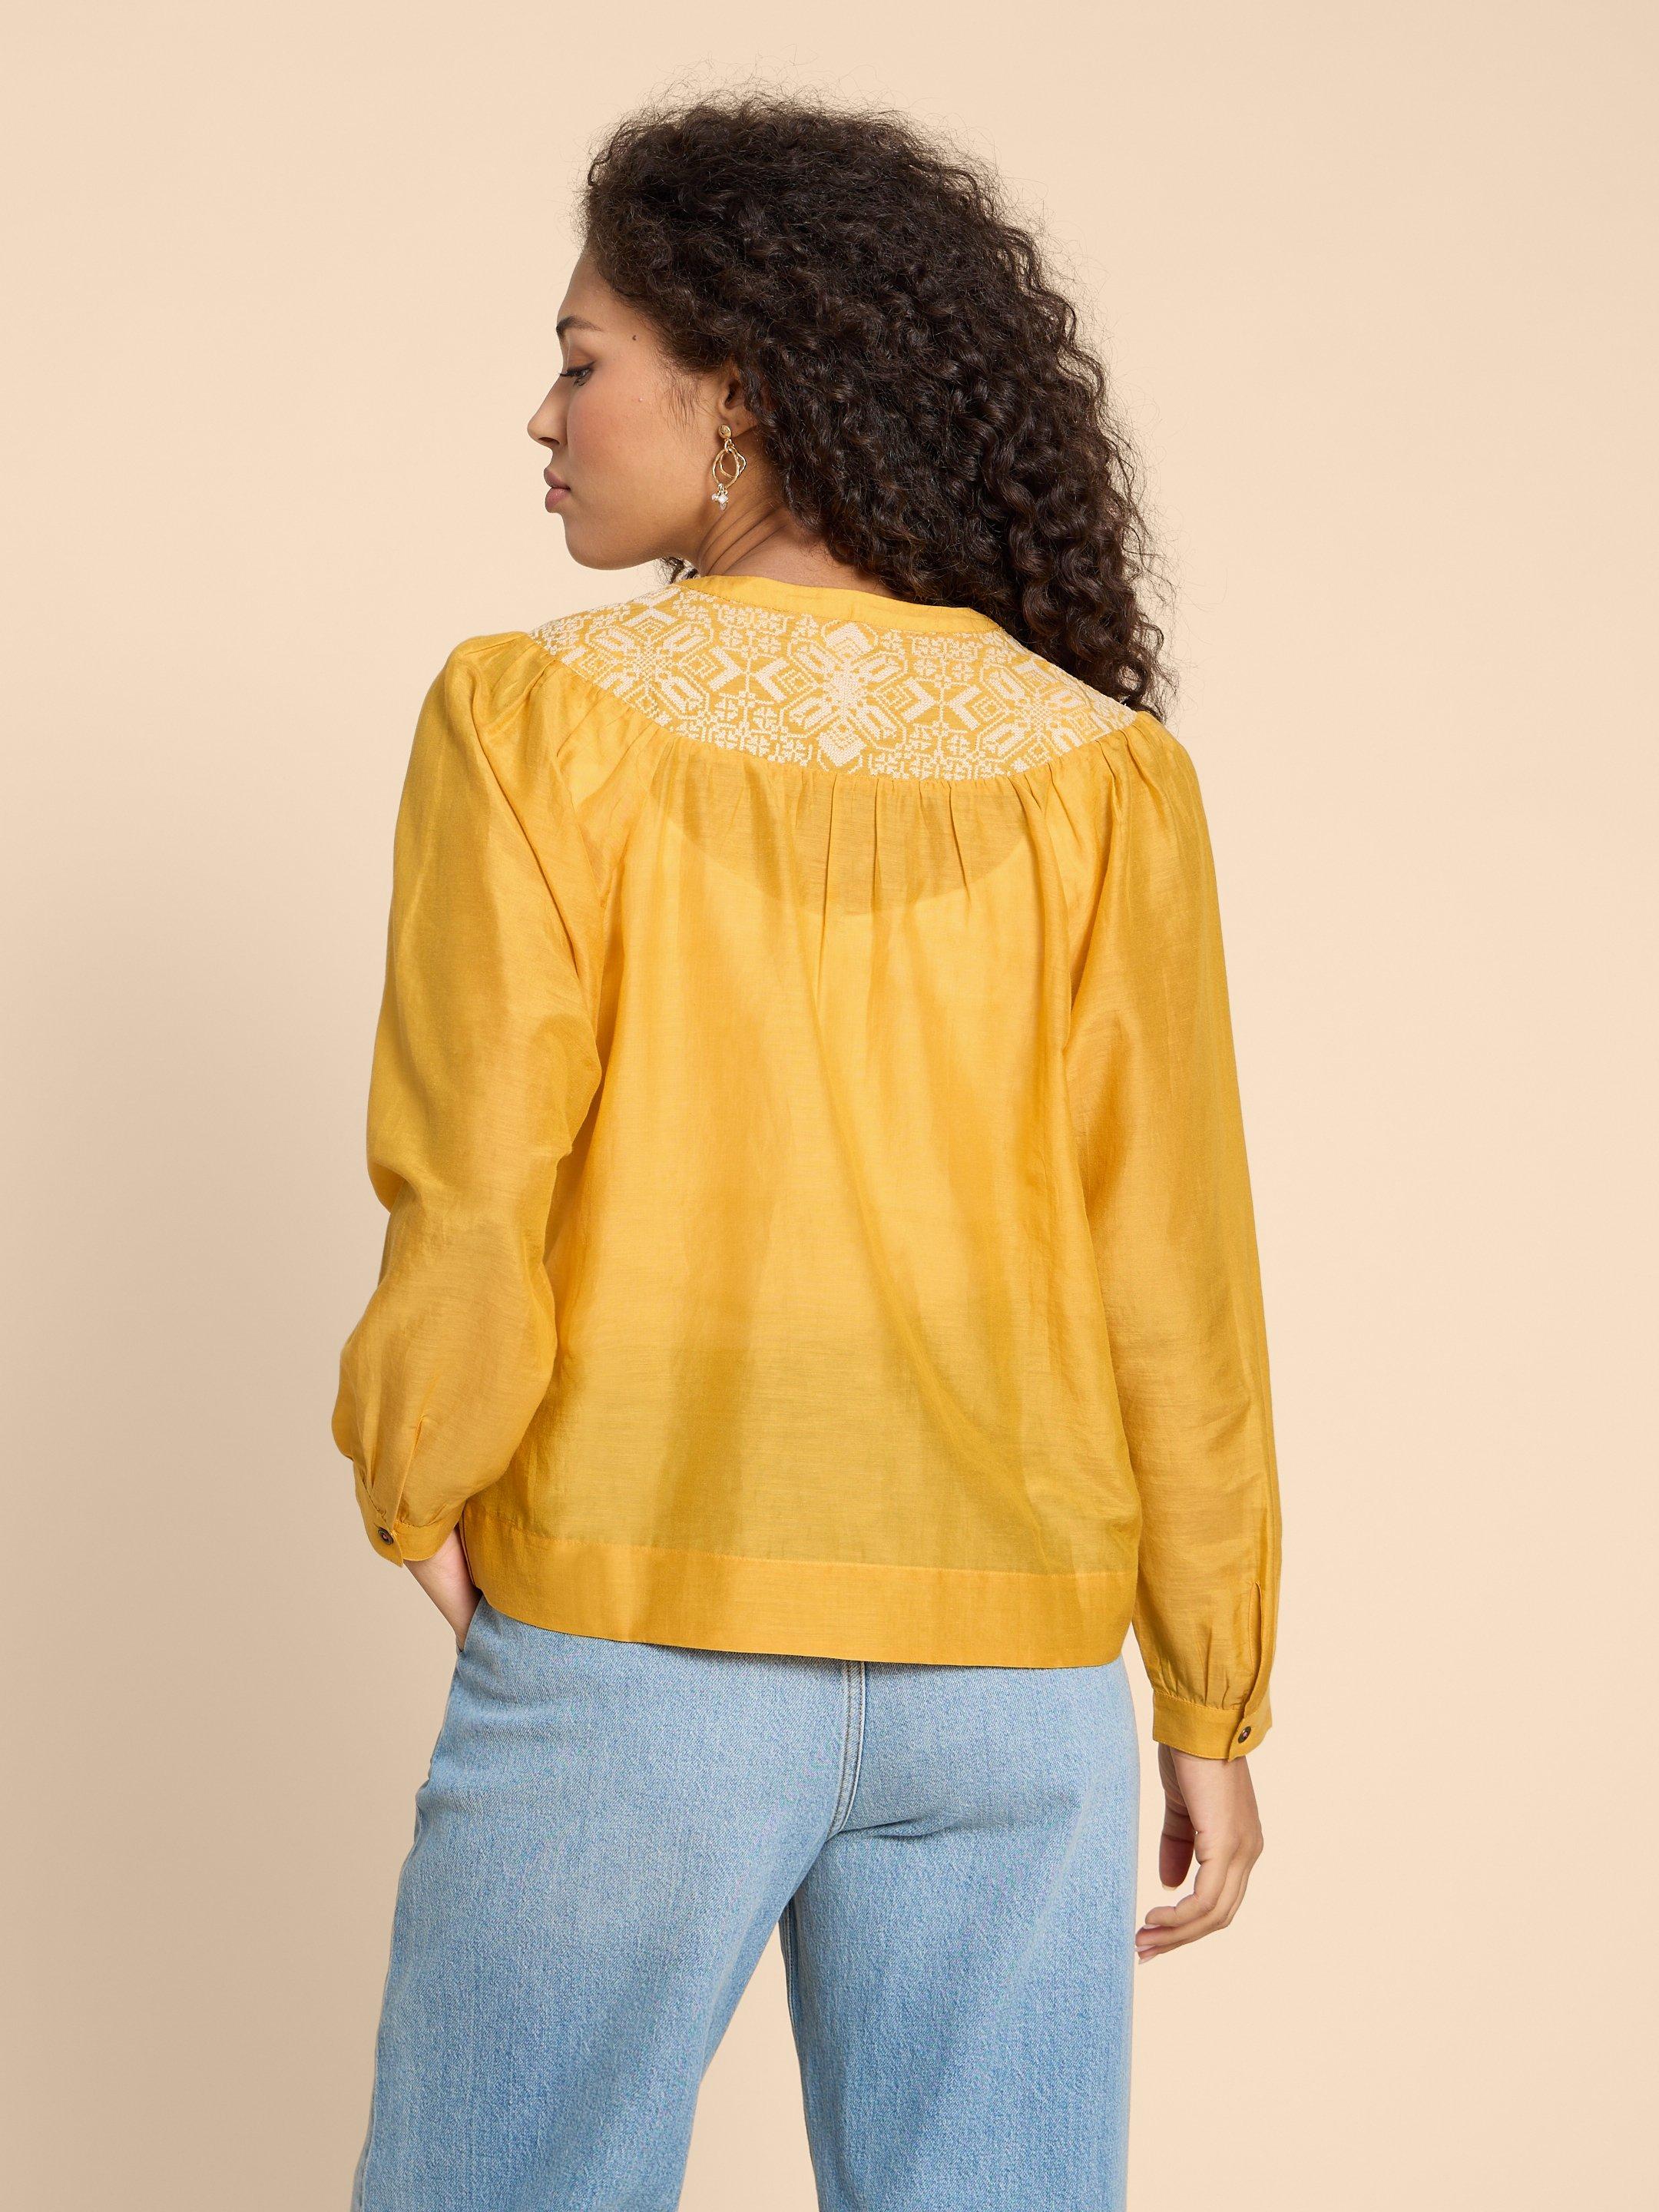 Rose Cotton Silk Top in CHART MLT - MODEL BACK